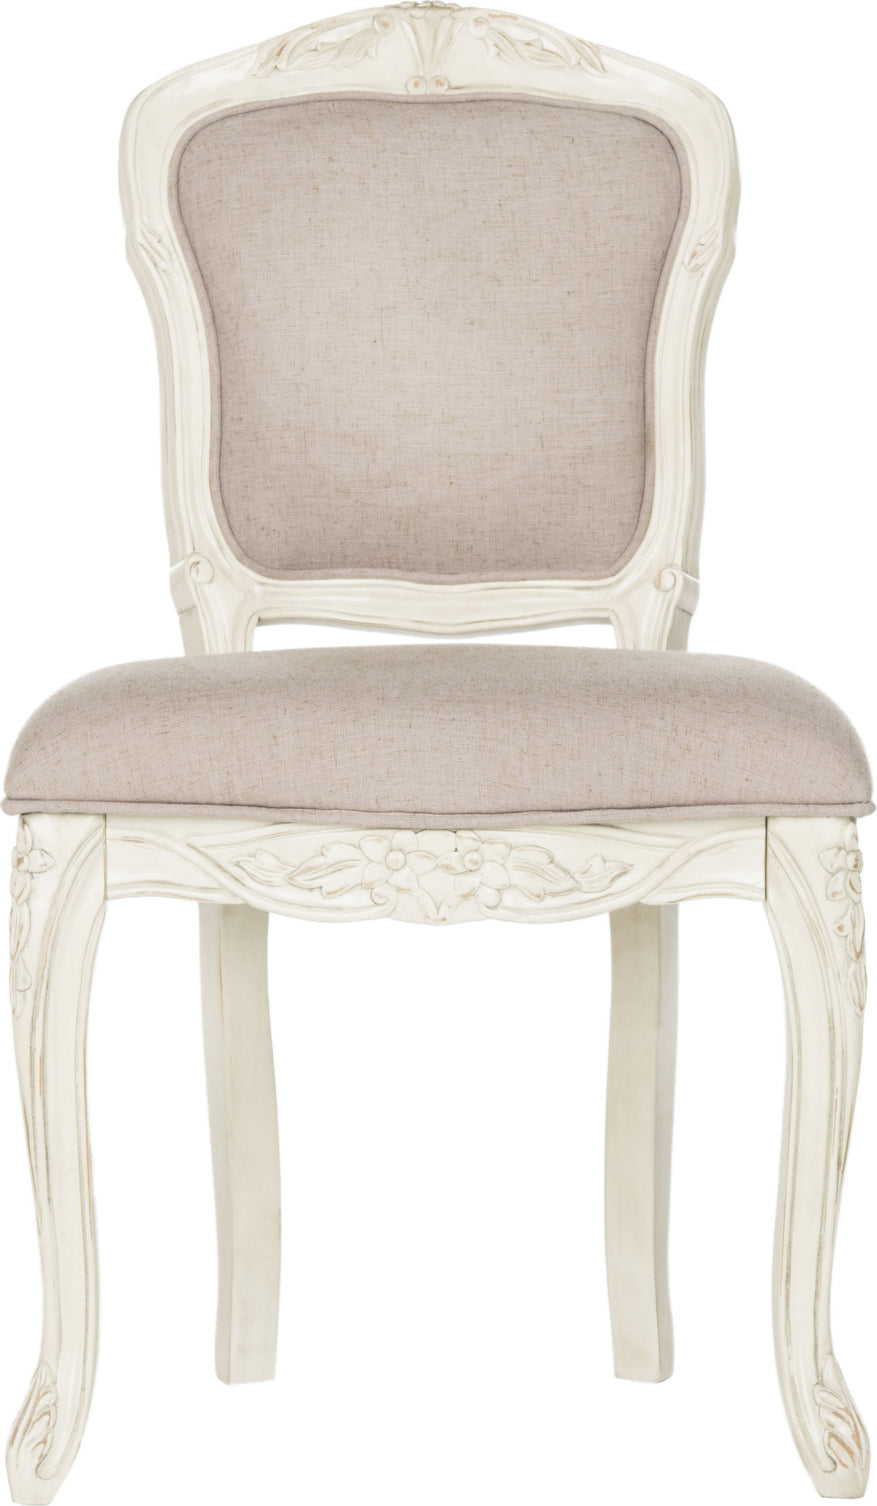 Safavieh Burgess French Leg 37''H Brasserie Upholstered Side Chair Taupe and Antique Beige Furniture main image